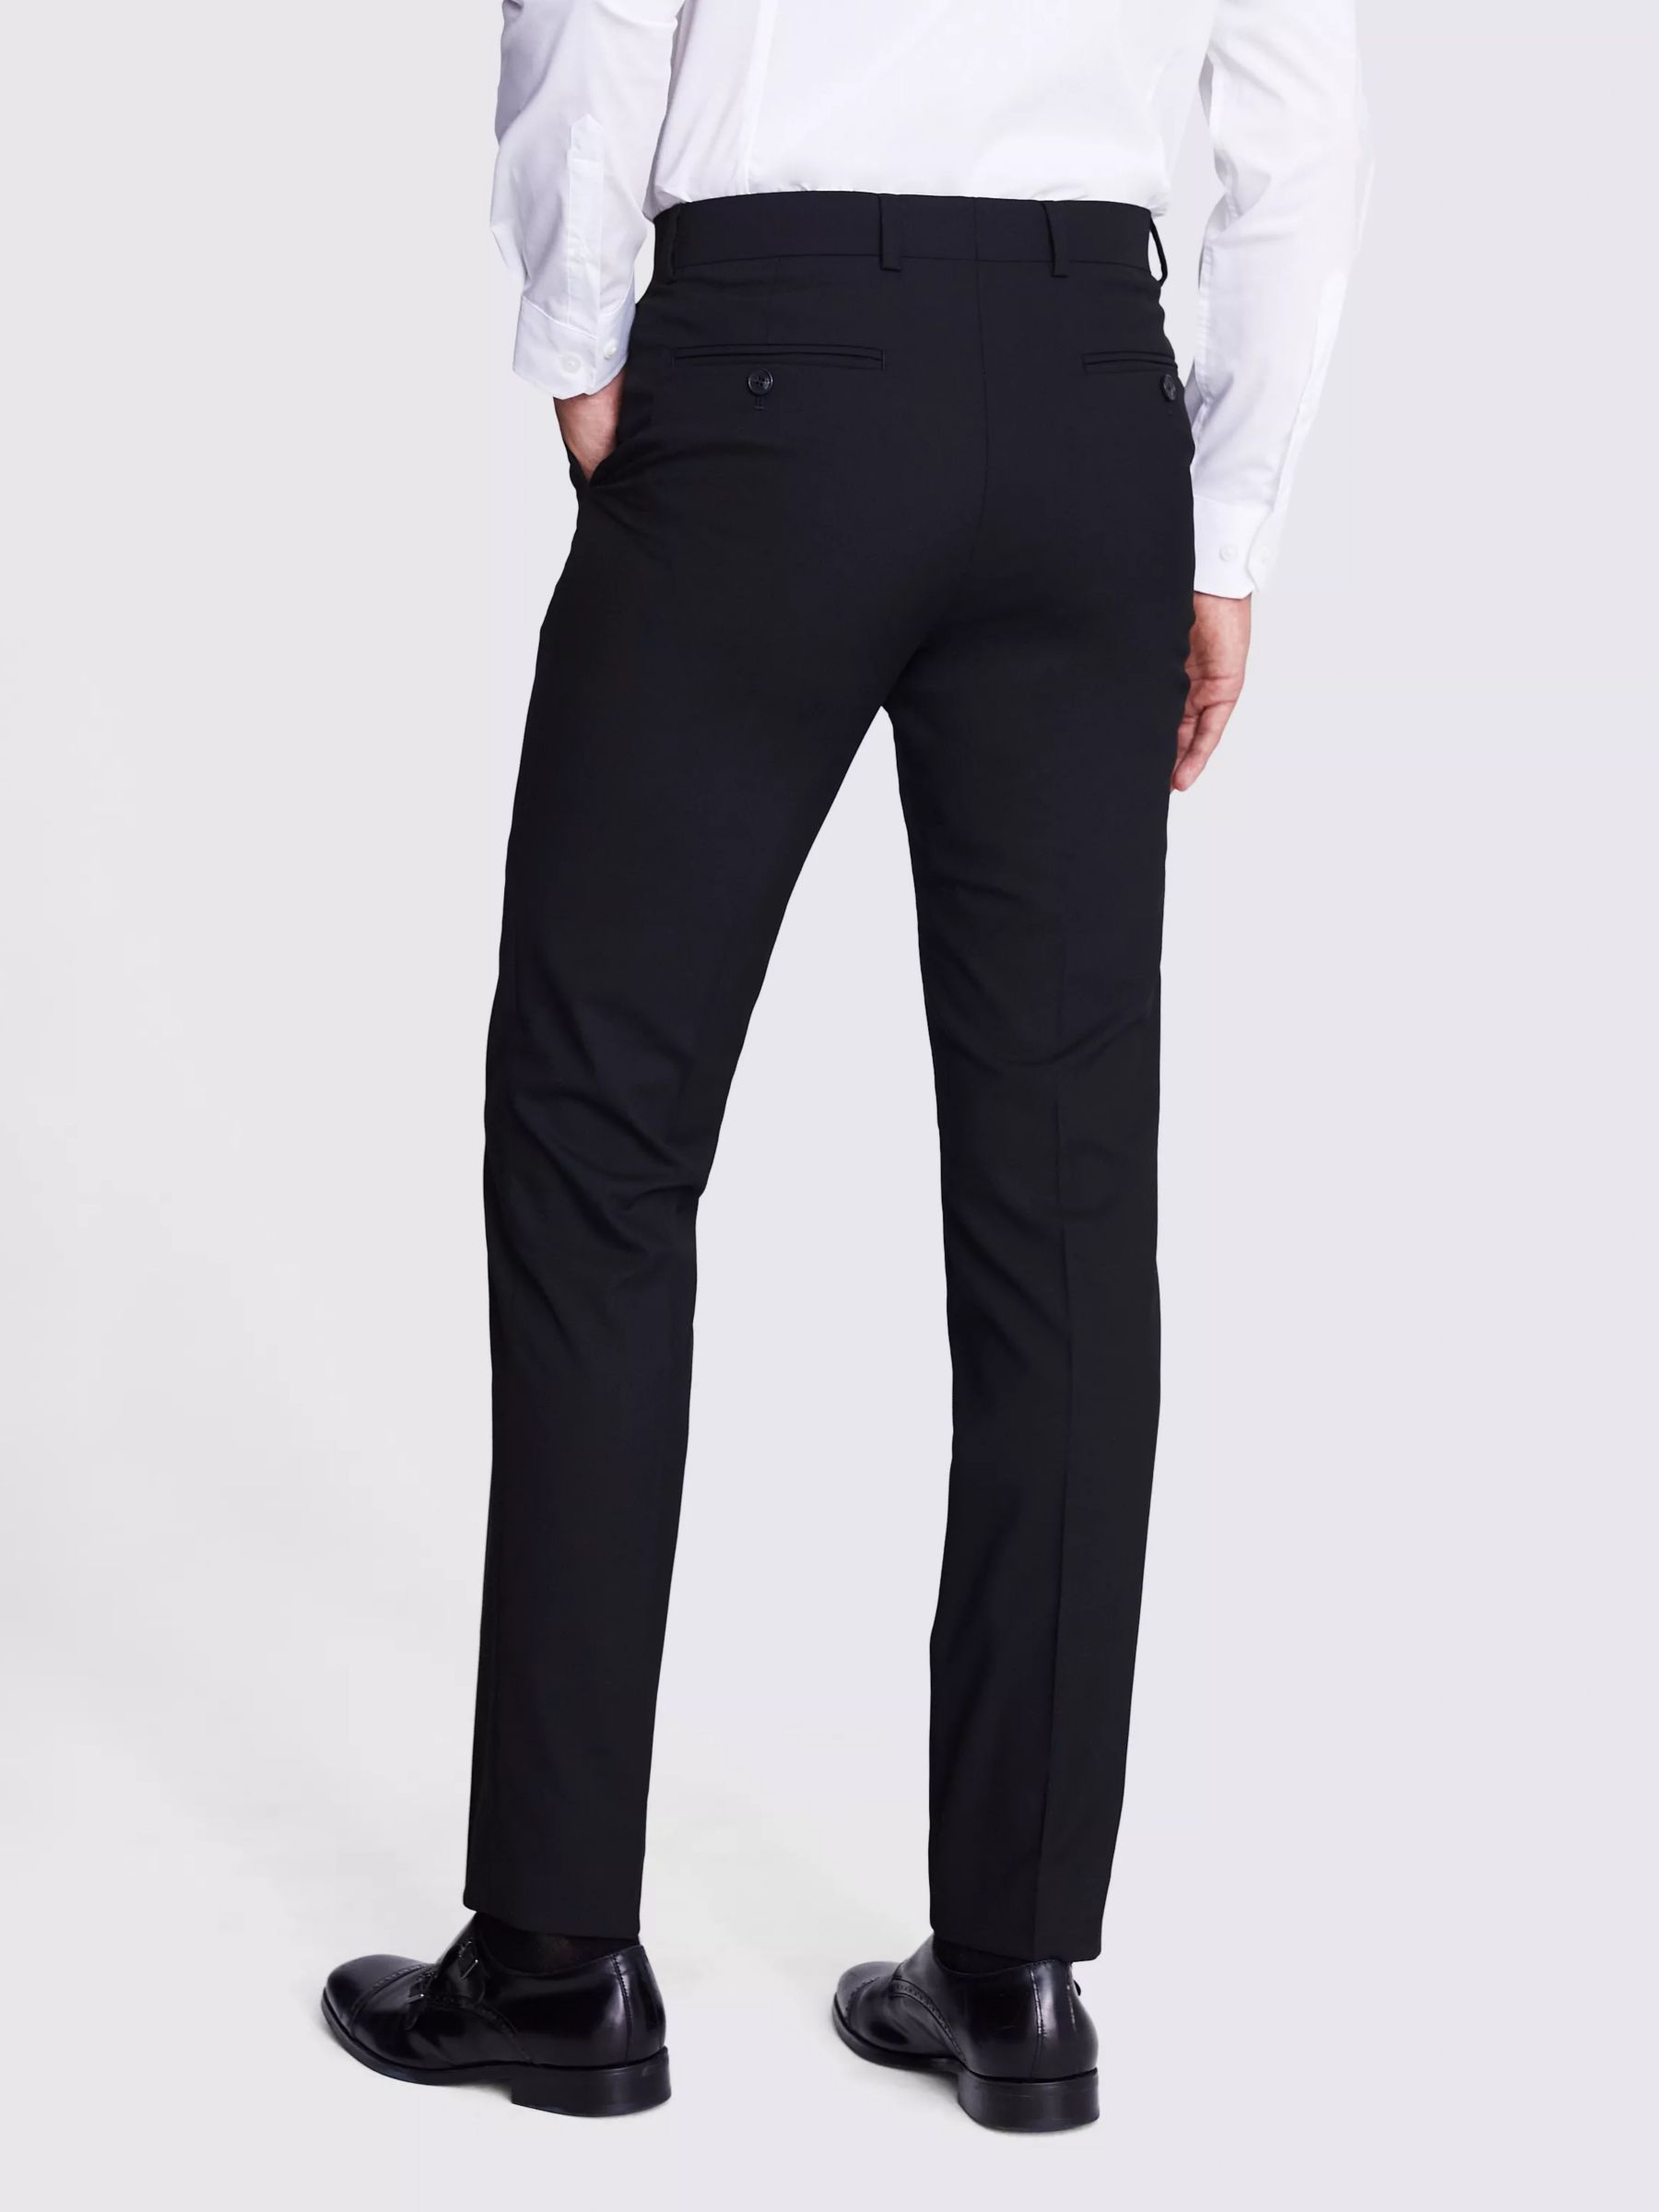 Moss Tailored Fit Trousers, Black at John Lewis & Partners